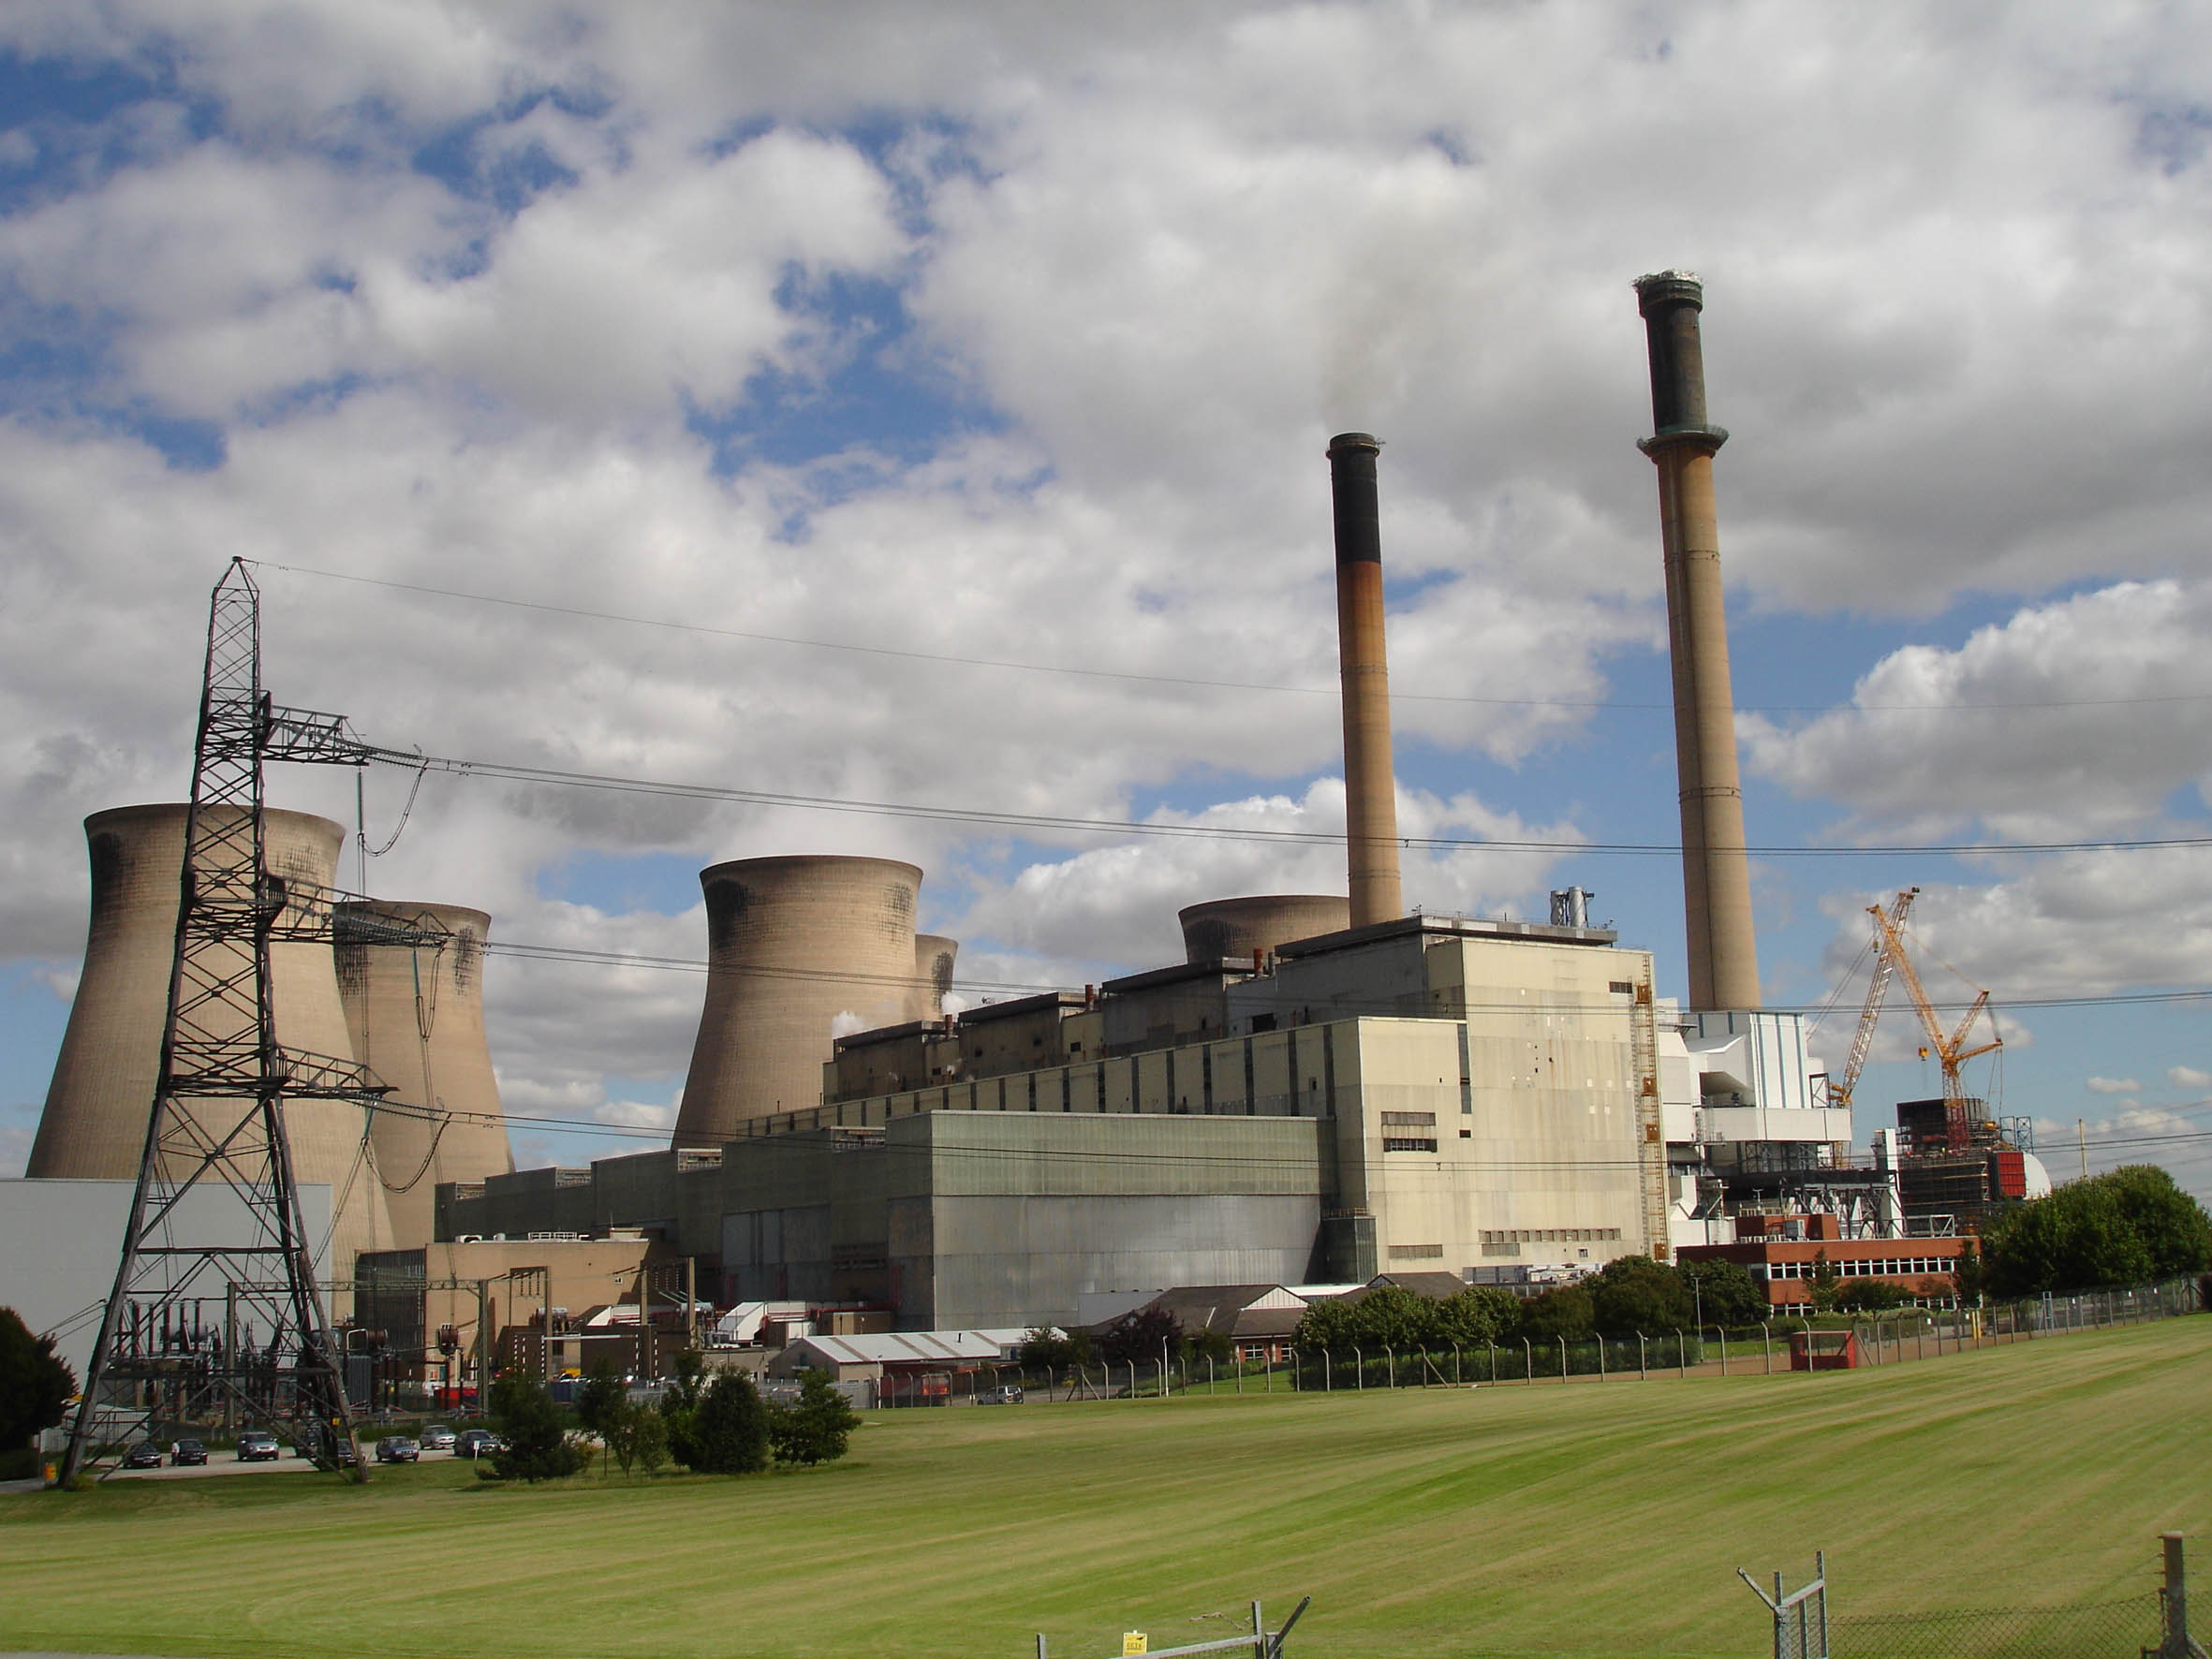 Rotork actuators selected for environmental improvement project at Ferrybridge Power Station